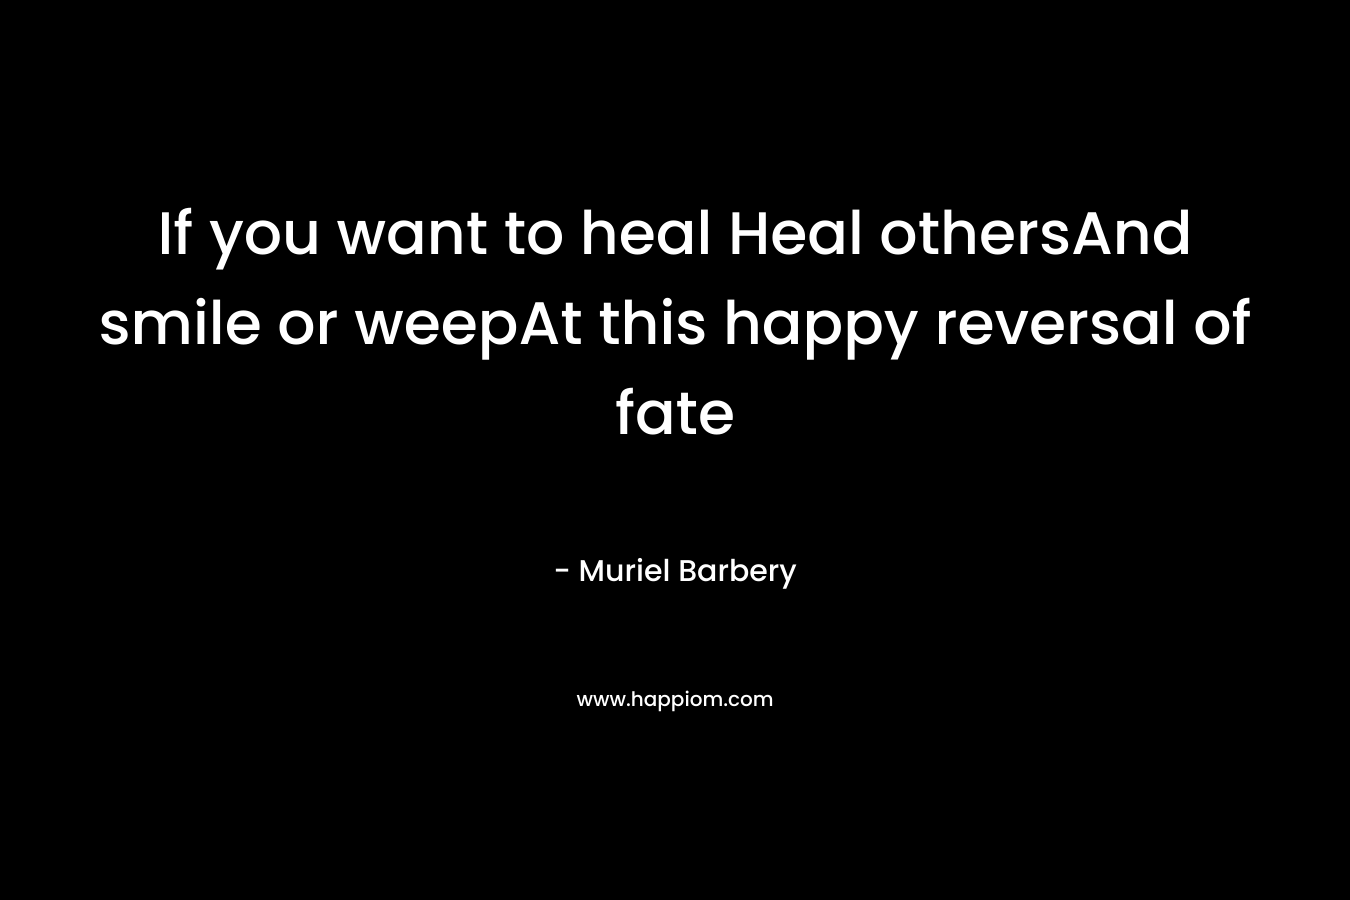 If you want to heal Heal othersAnd smile or weepAt this happy reversal of fate